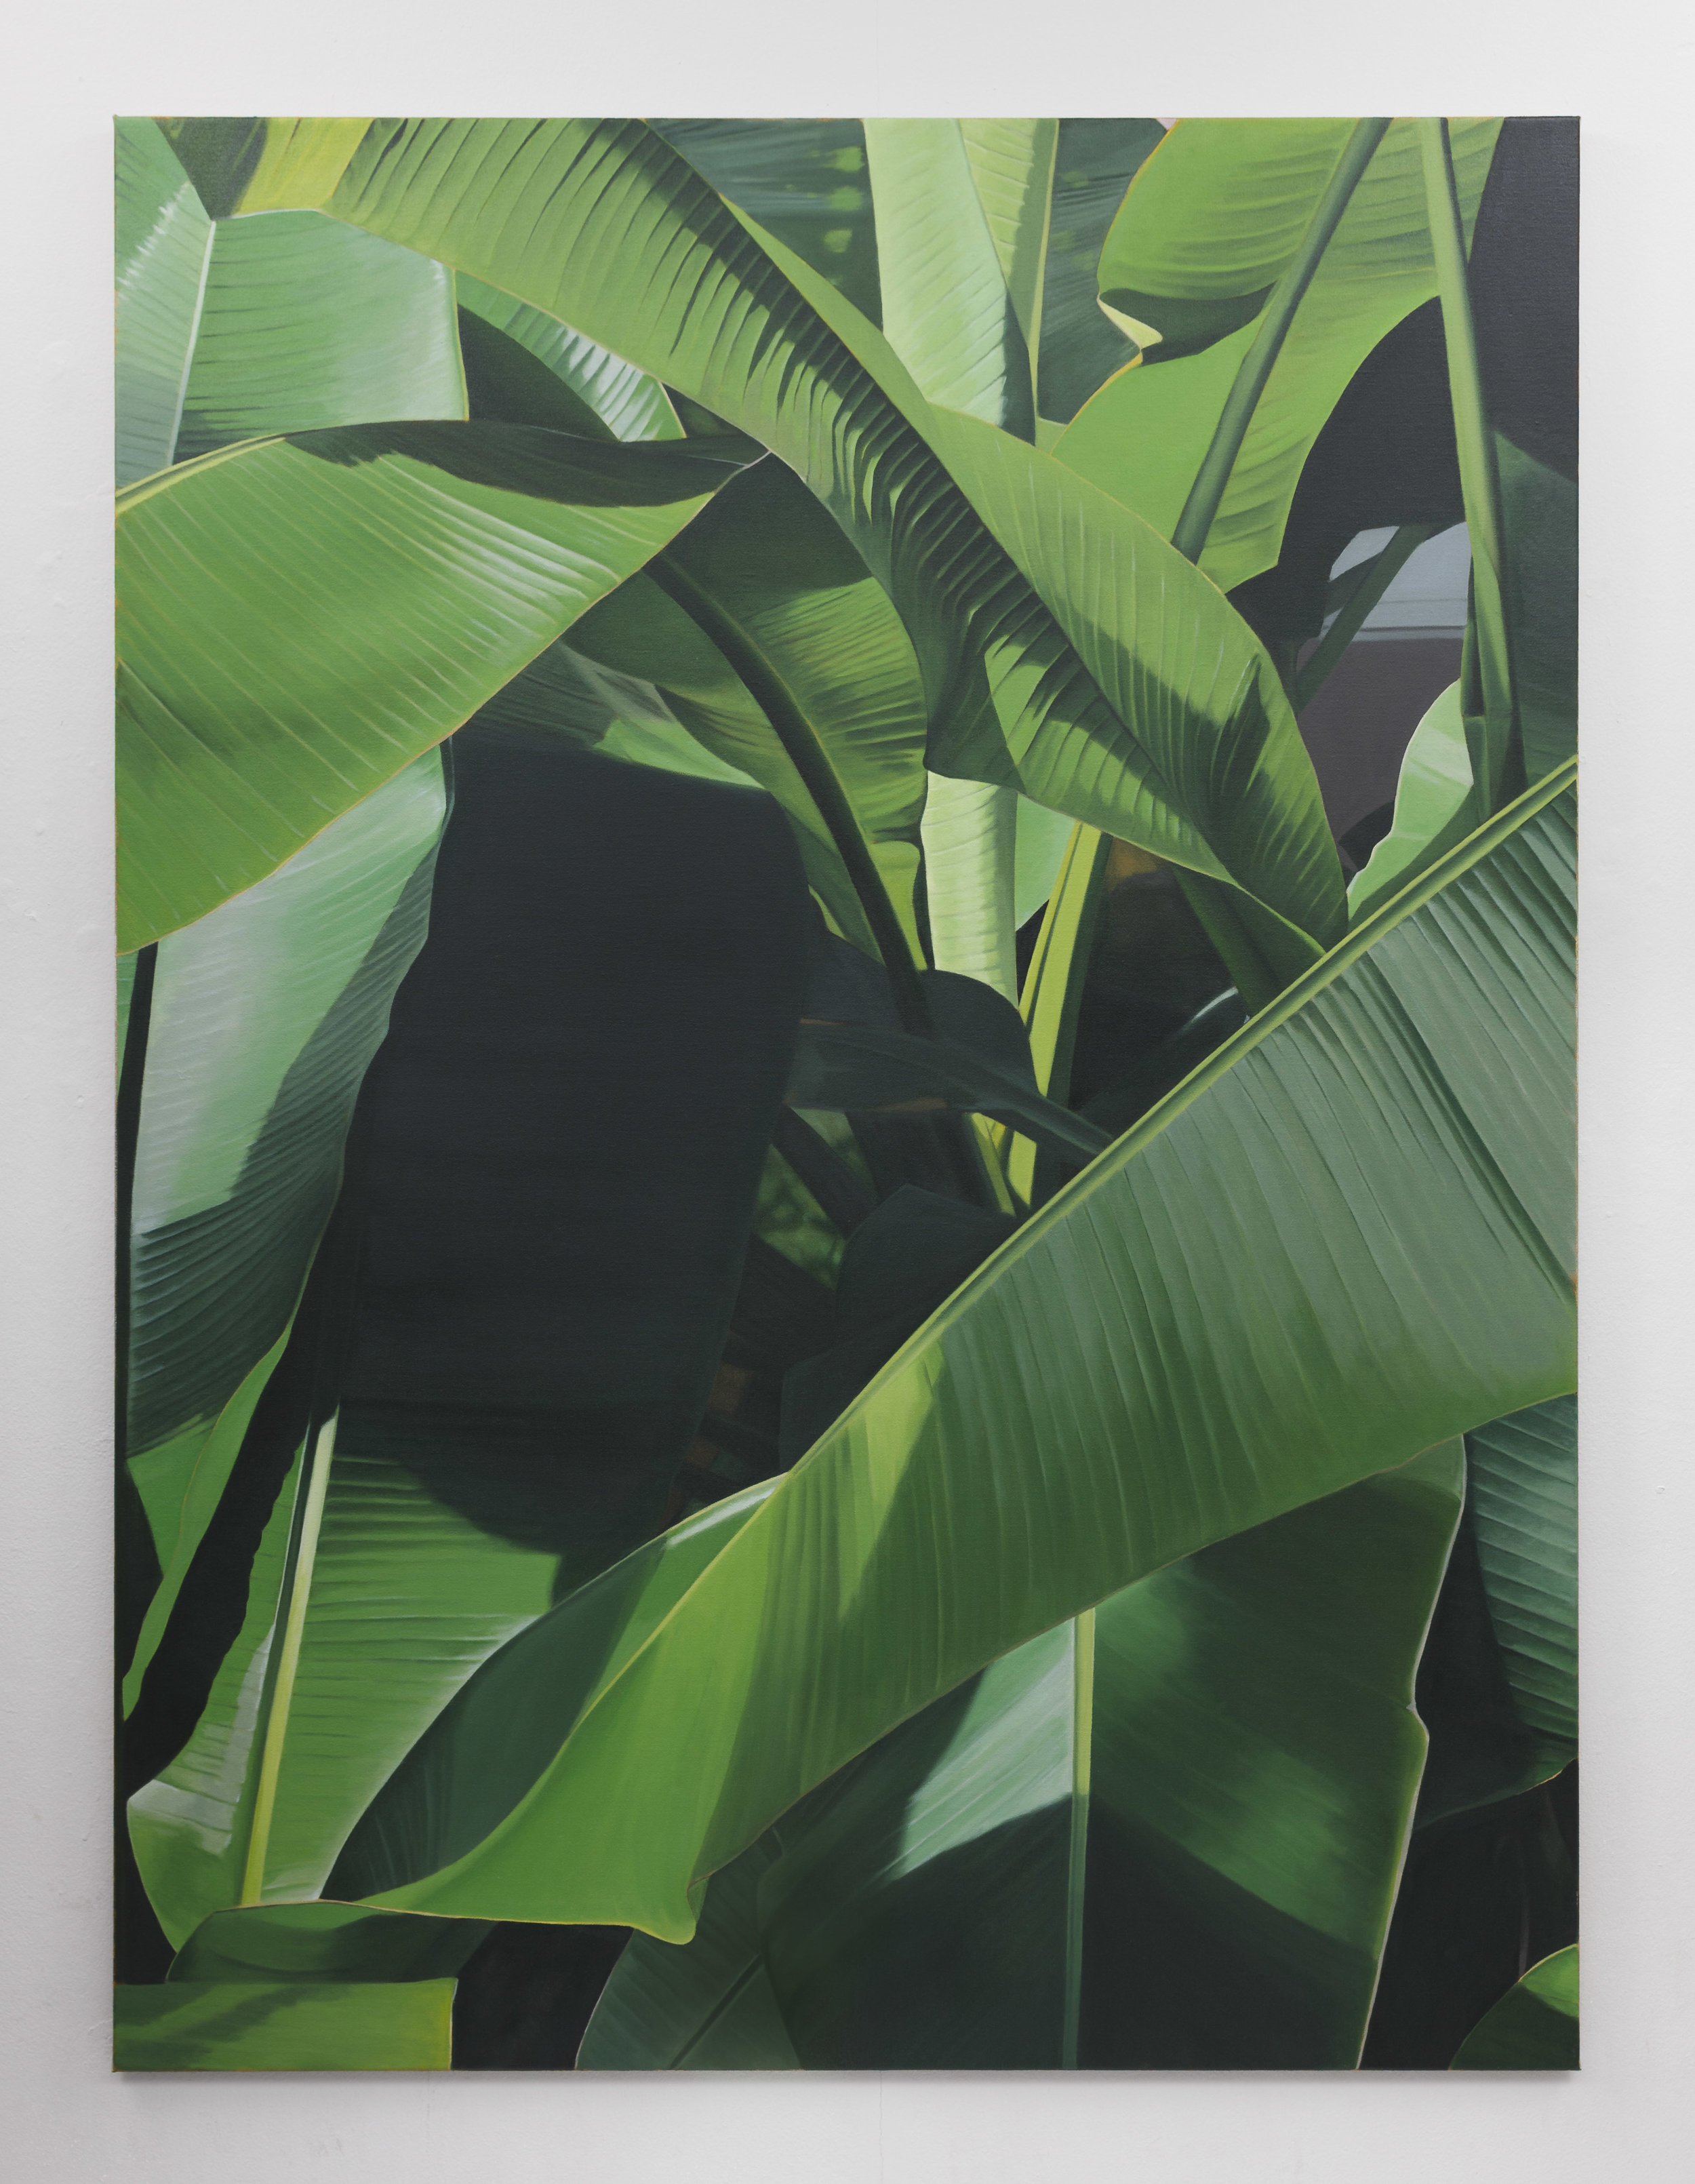  Banana II | 2019 | Oil on linen | 160 x 120 cm | Private Collection | Photo by Lee Welch | Shortlisted The RHA Hennessy Craig Award 